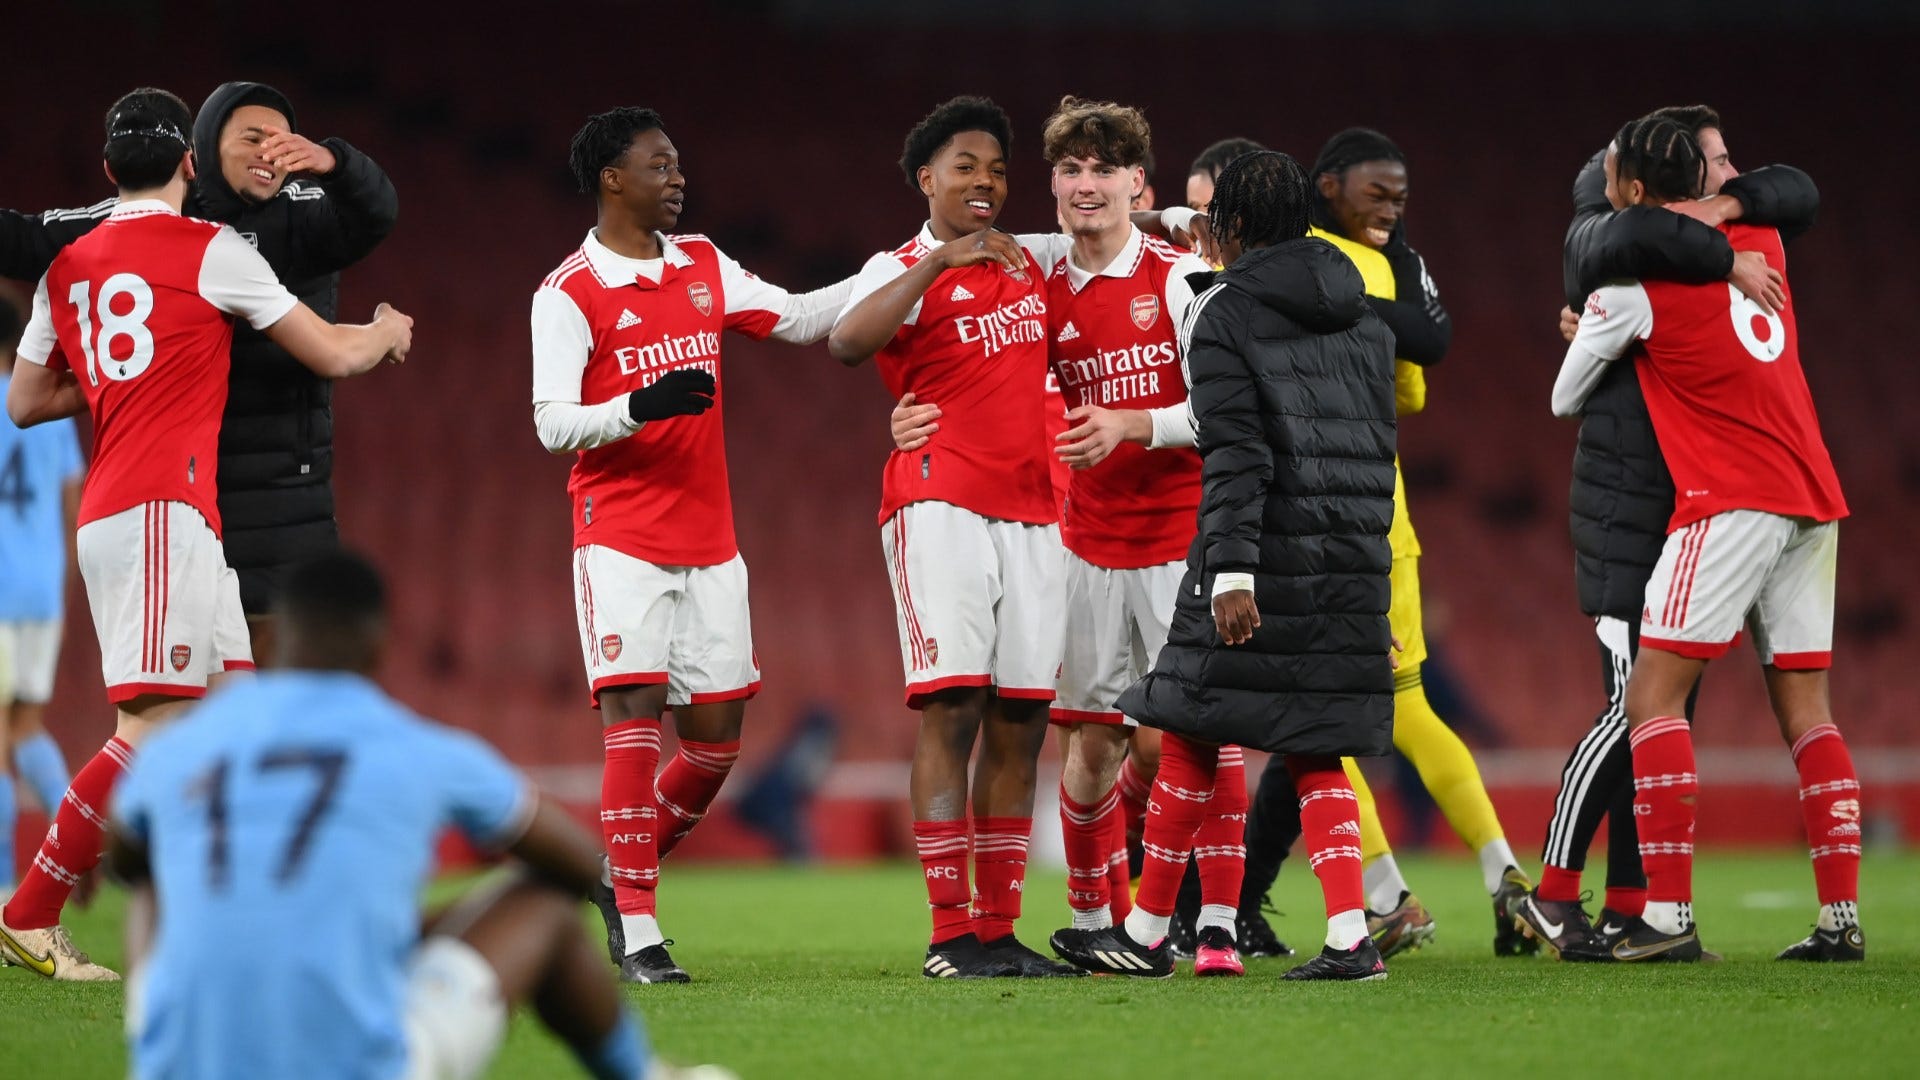 Arsenal U18 vs West Ham U18 Where to watch FA Youth Cup final online, live stream, TV channels and kick-off time Goal US